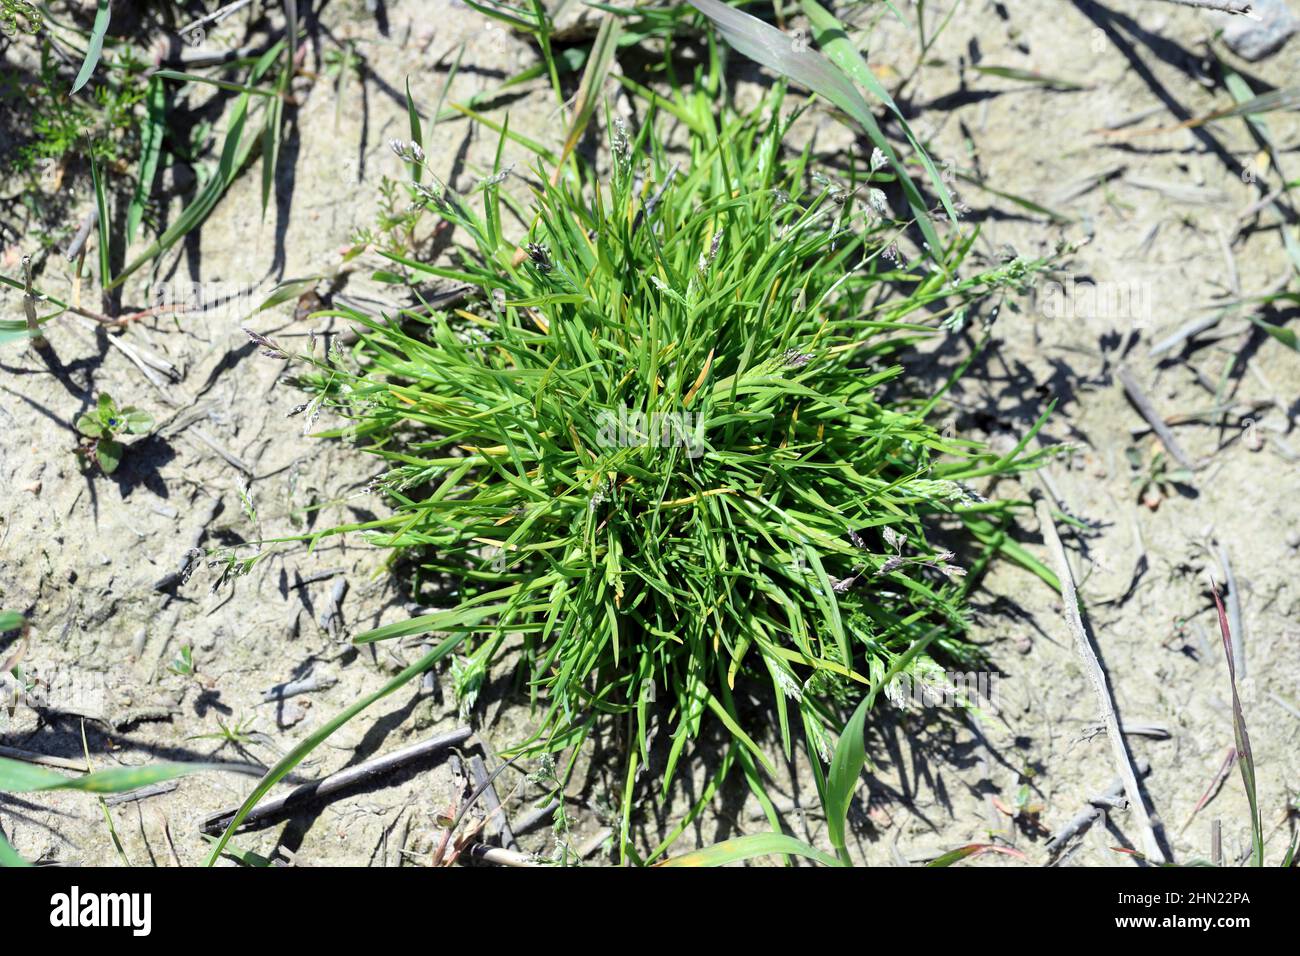 Poa annua or annual meadow grass. Widespread and common weeds in agricultural and horticultural crops. Stock Photo